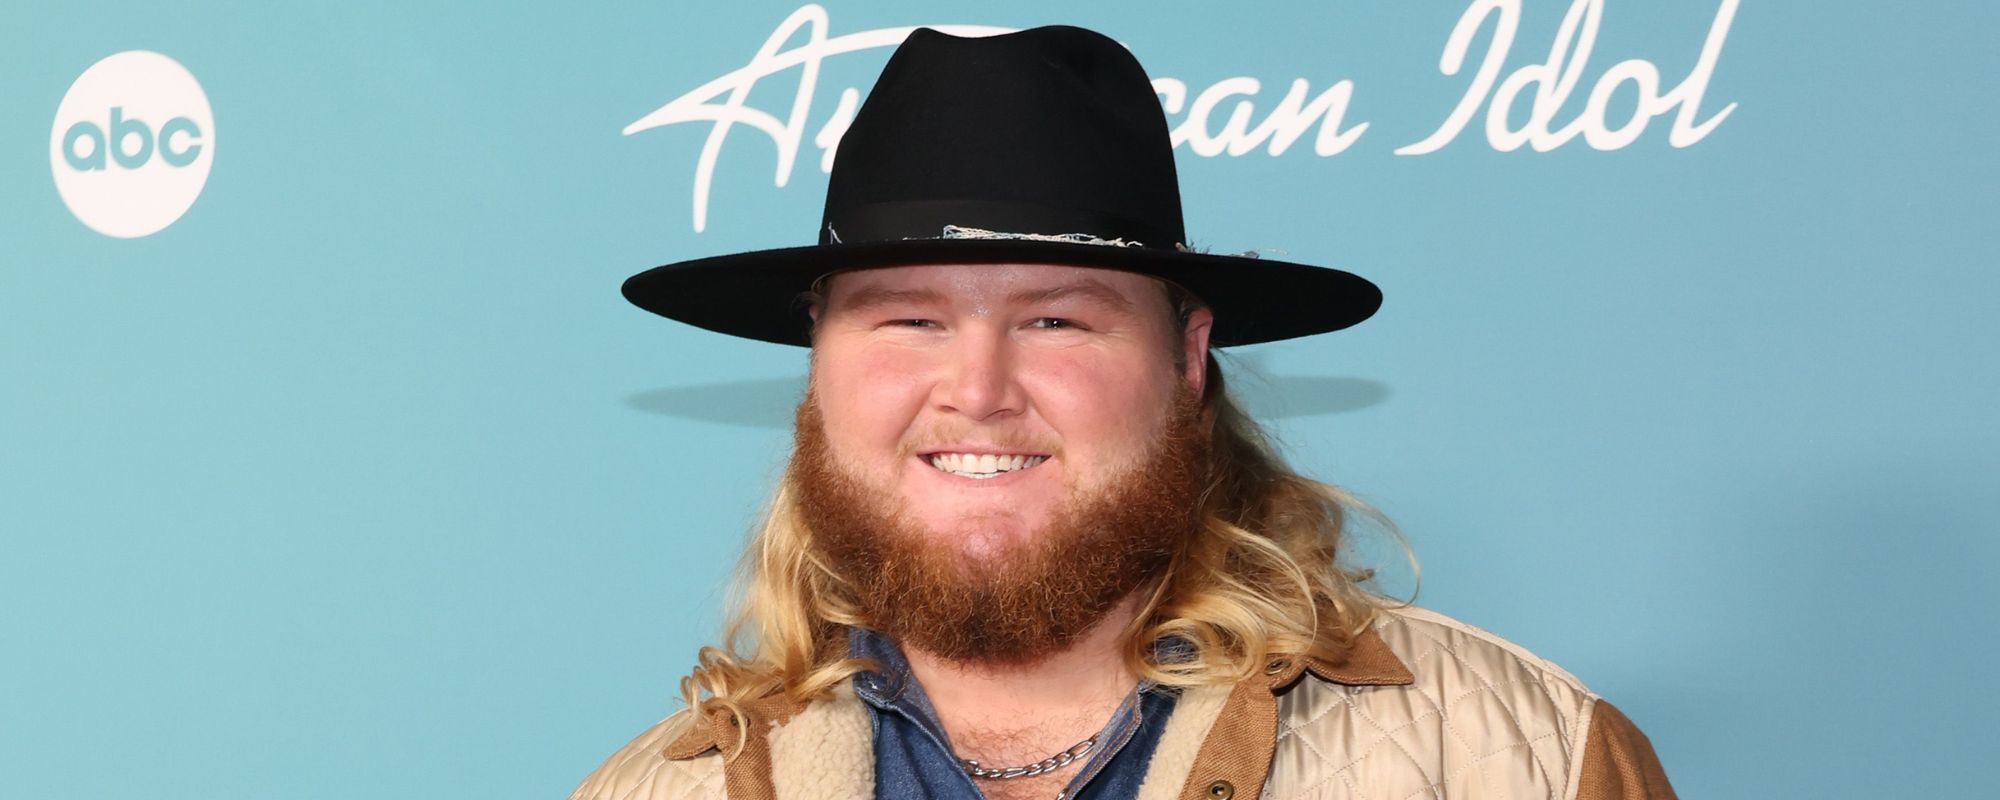 'American Idol' Runner-Up Will Moseley Plans to Make Music 'Until the Day I Die'